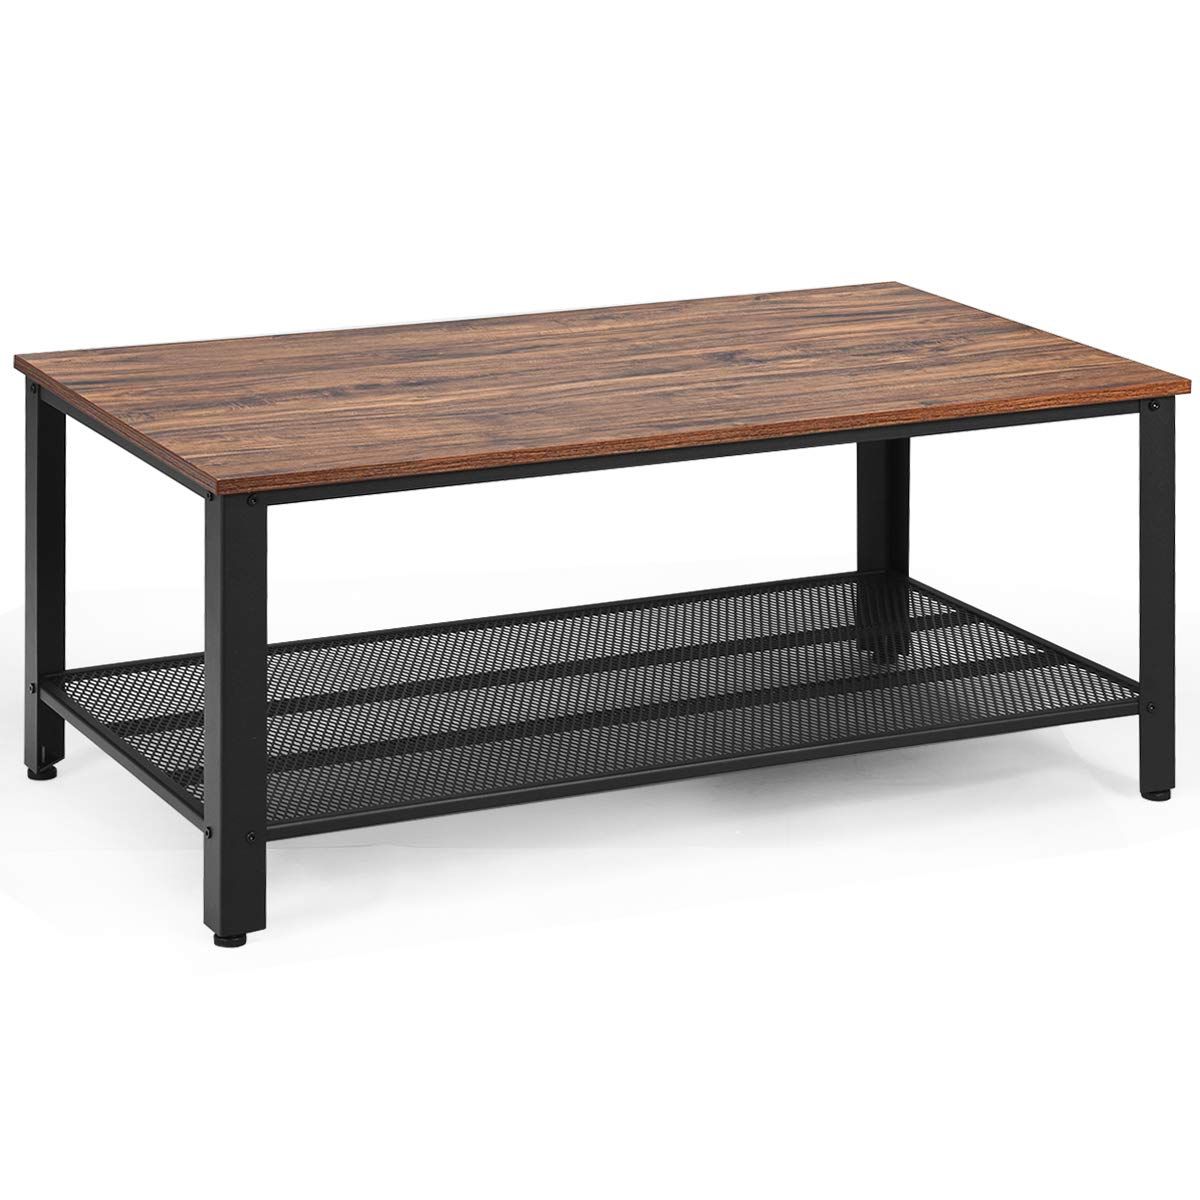 Giantex Coffee Table 42 Inch W/storage Shelf And Inside Most Recent Pecan Brown Triangular Coffee Tables (View 11 of 20)